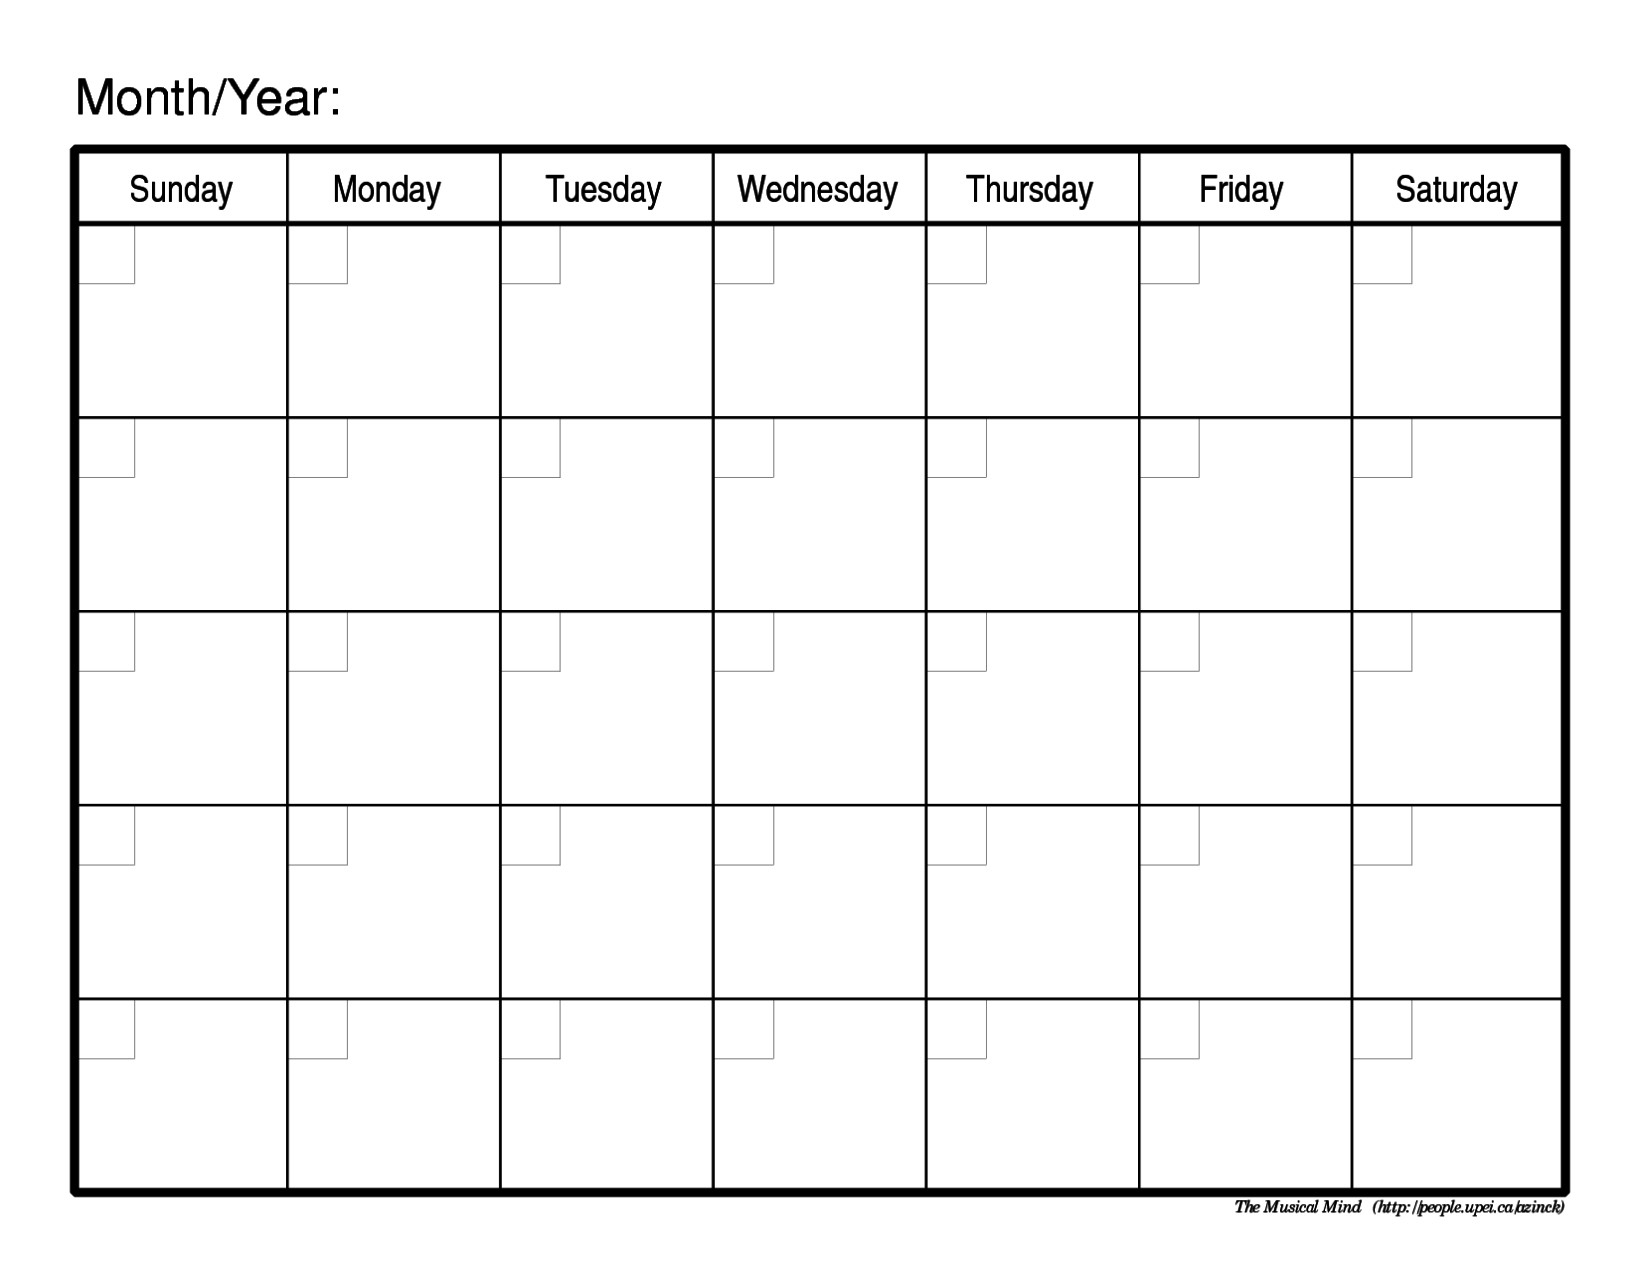 Schedule Template Free Blank Printable R Aaron The Artist Weekly pertaining to Full Size Blank Printable Calendar